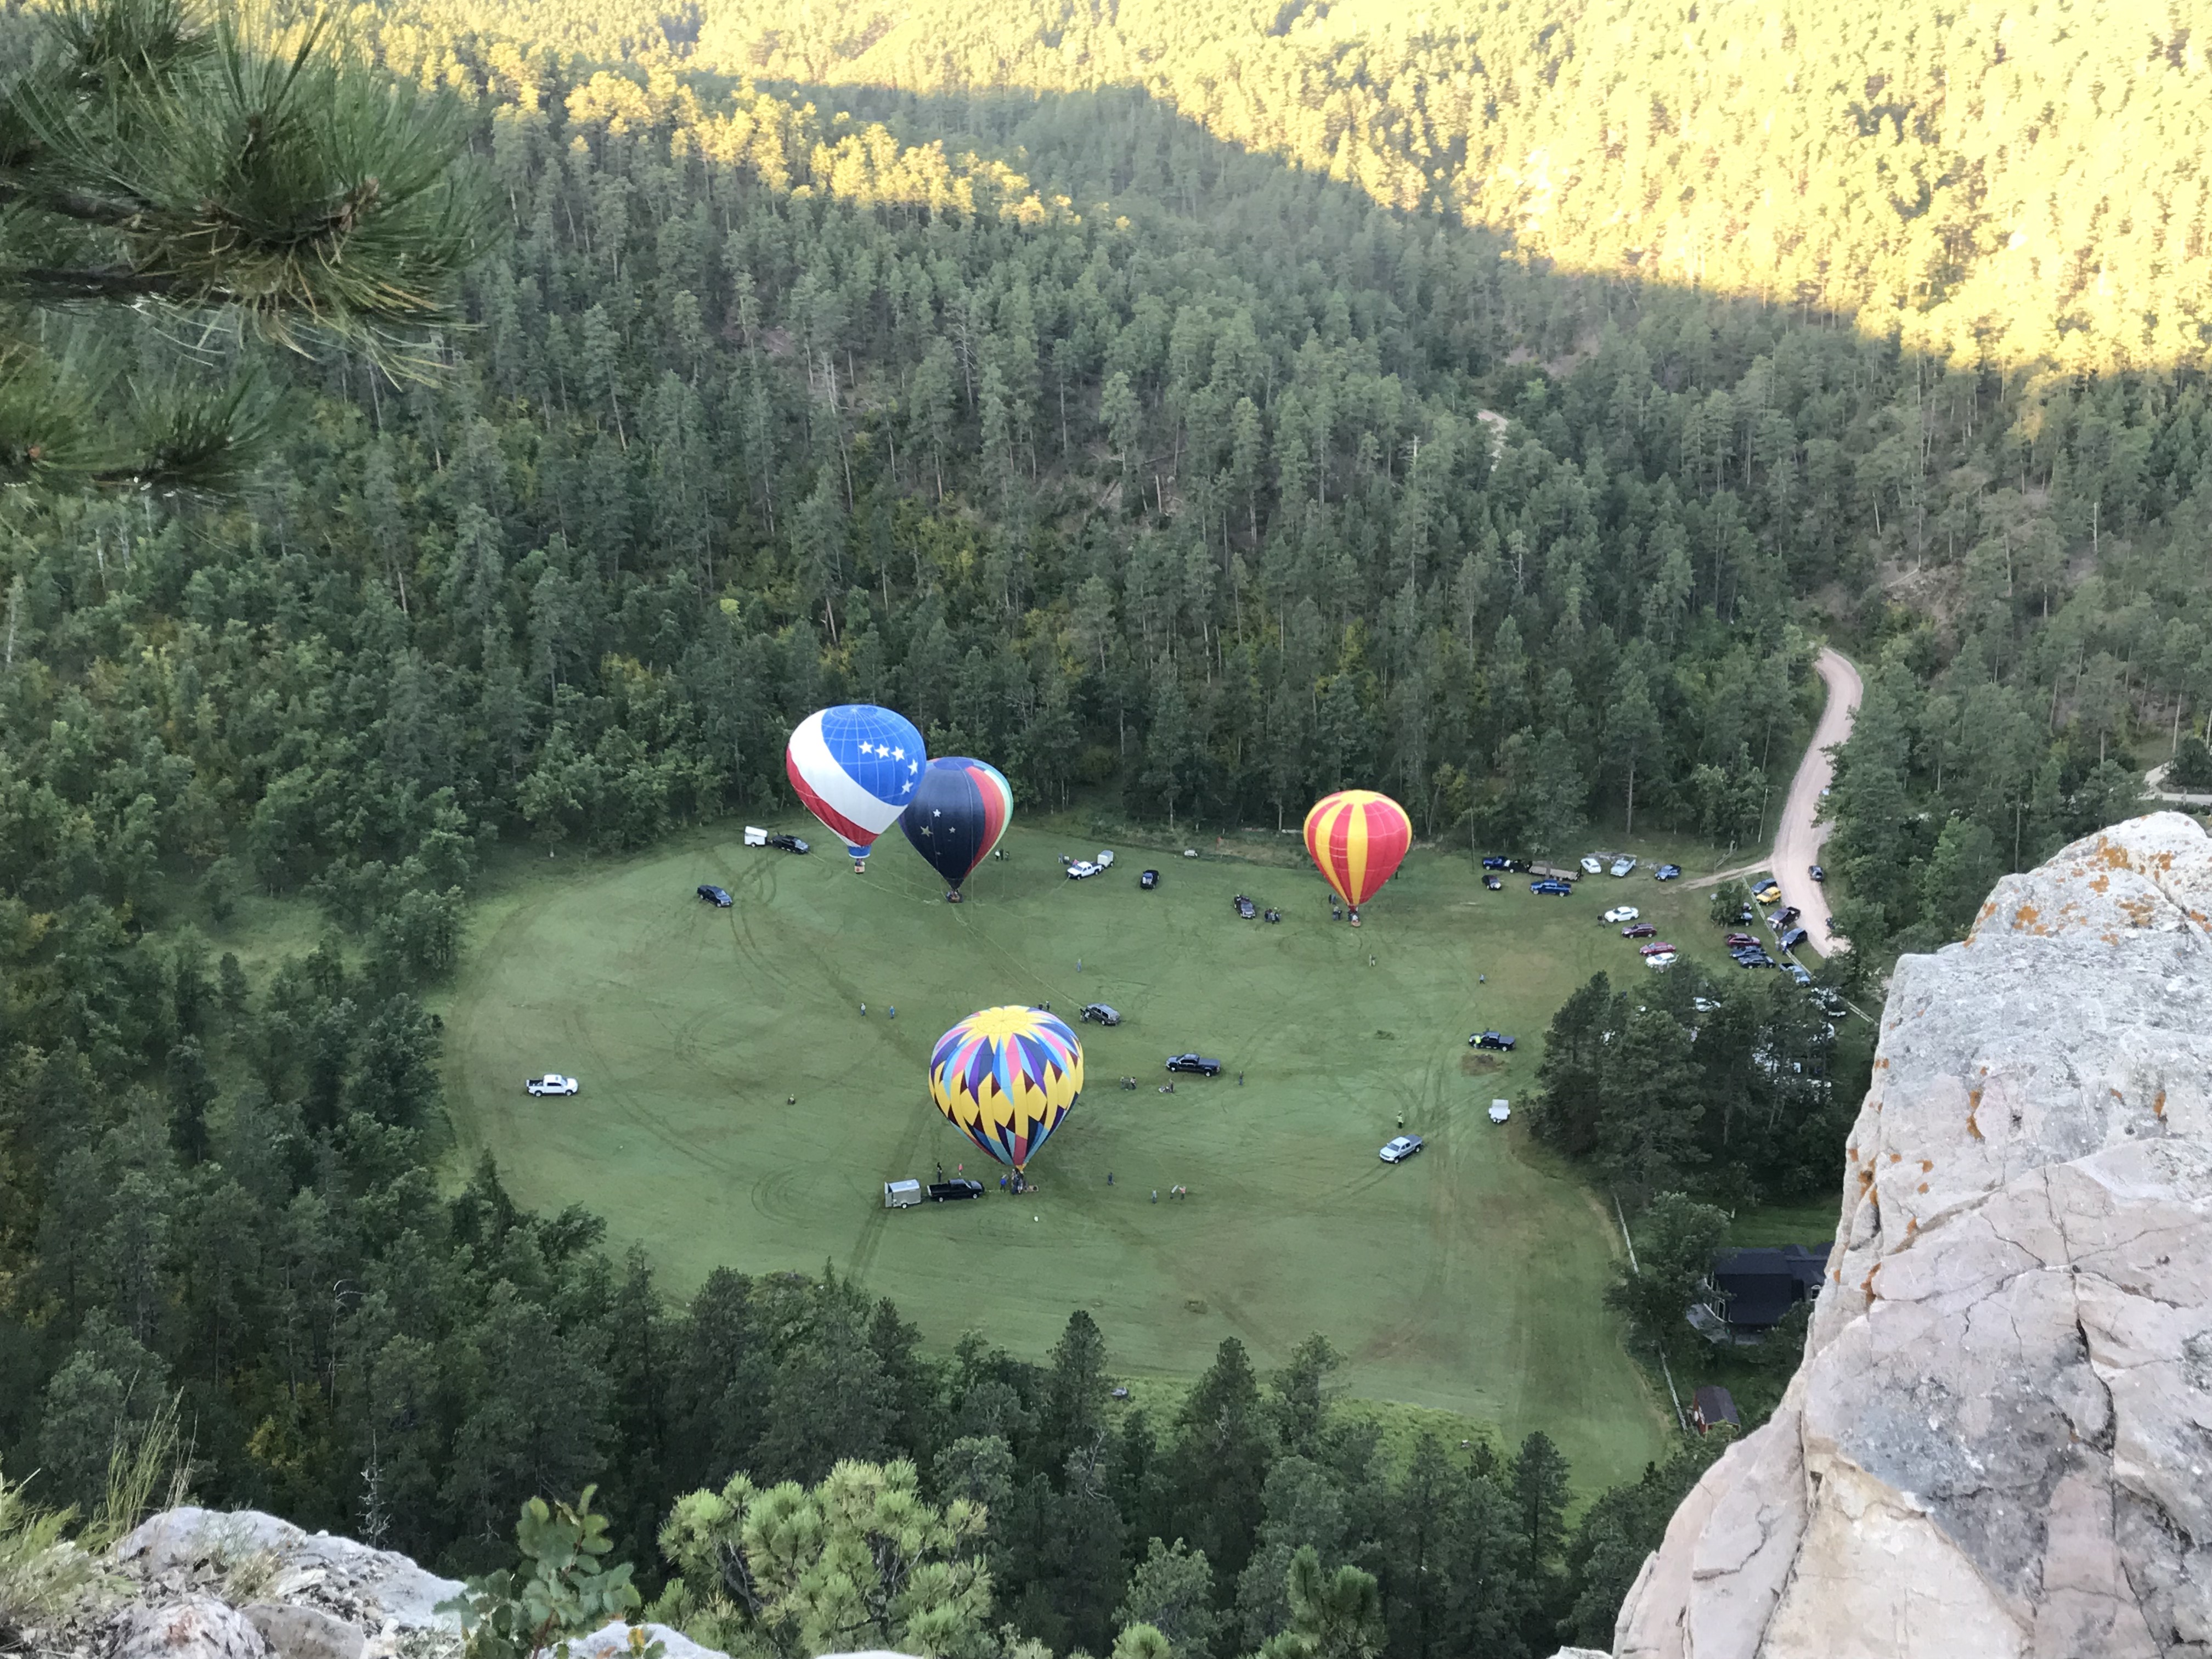 Top view of four colorful, hot air balloons floating near a grassy, valley floor surrounded by pine trees. A peace sign has been mowed into the grass. Cars and trucks also dot the valley floor.